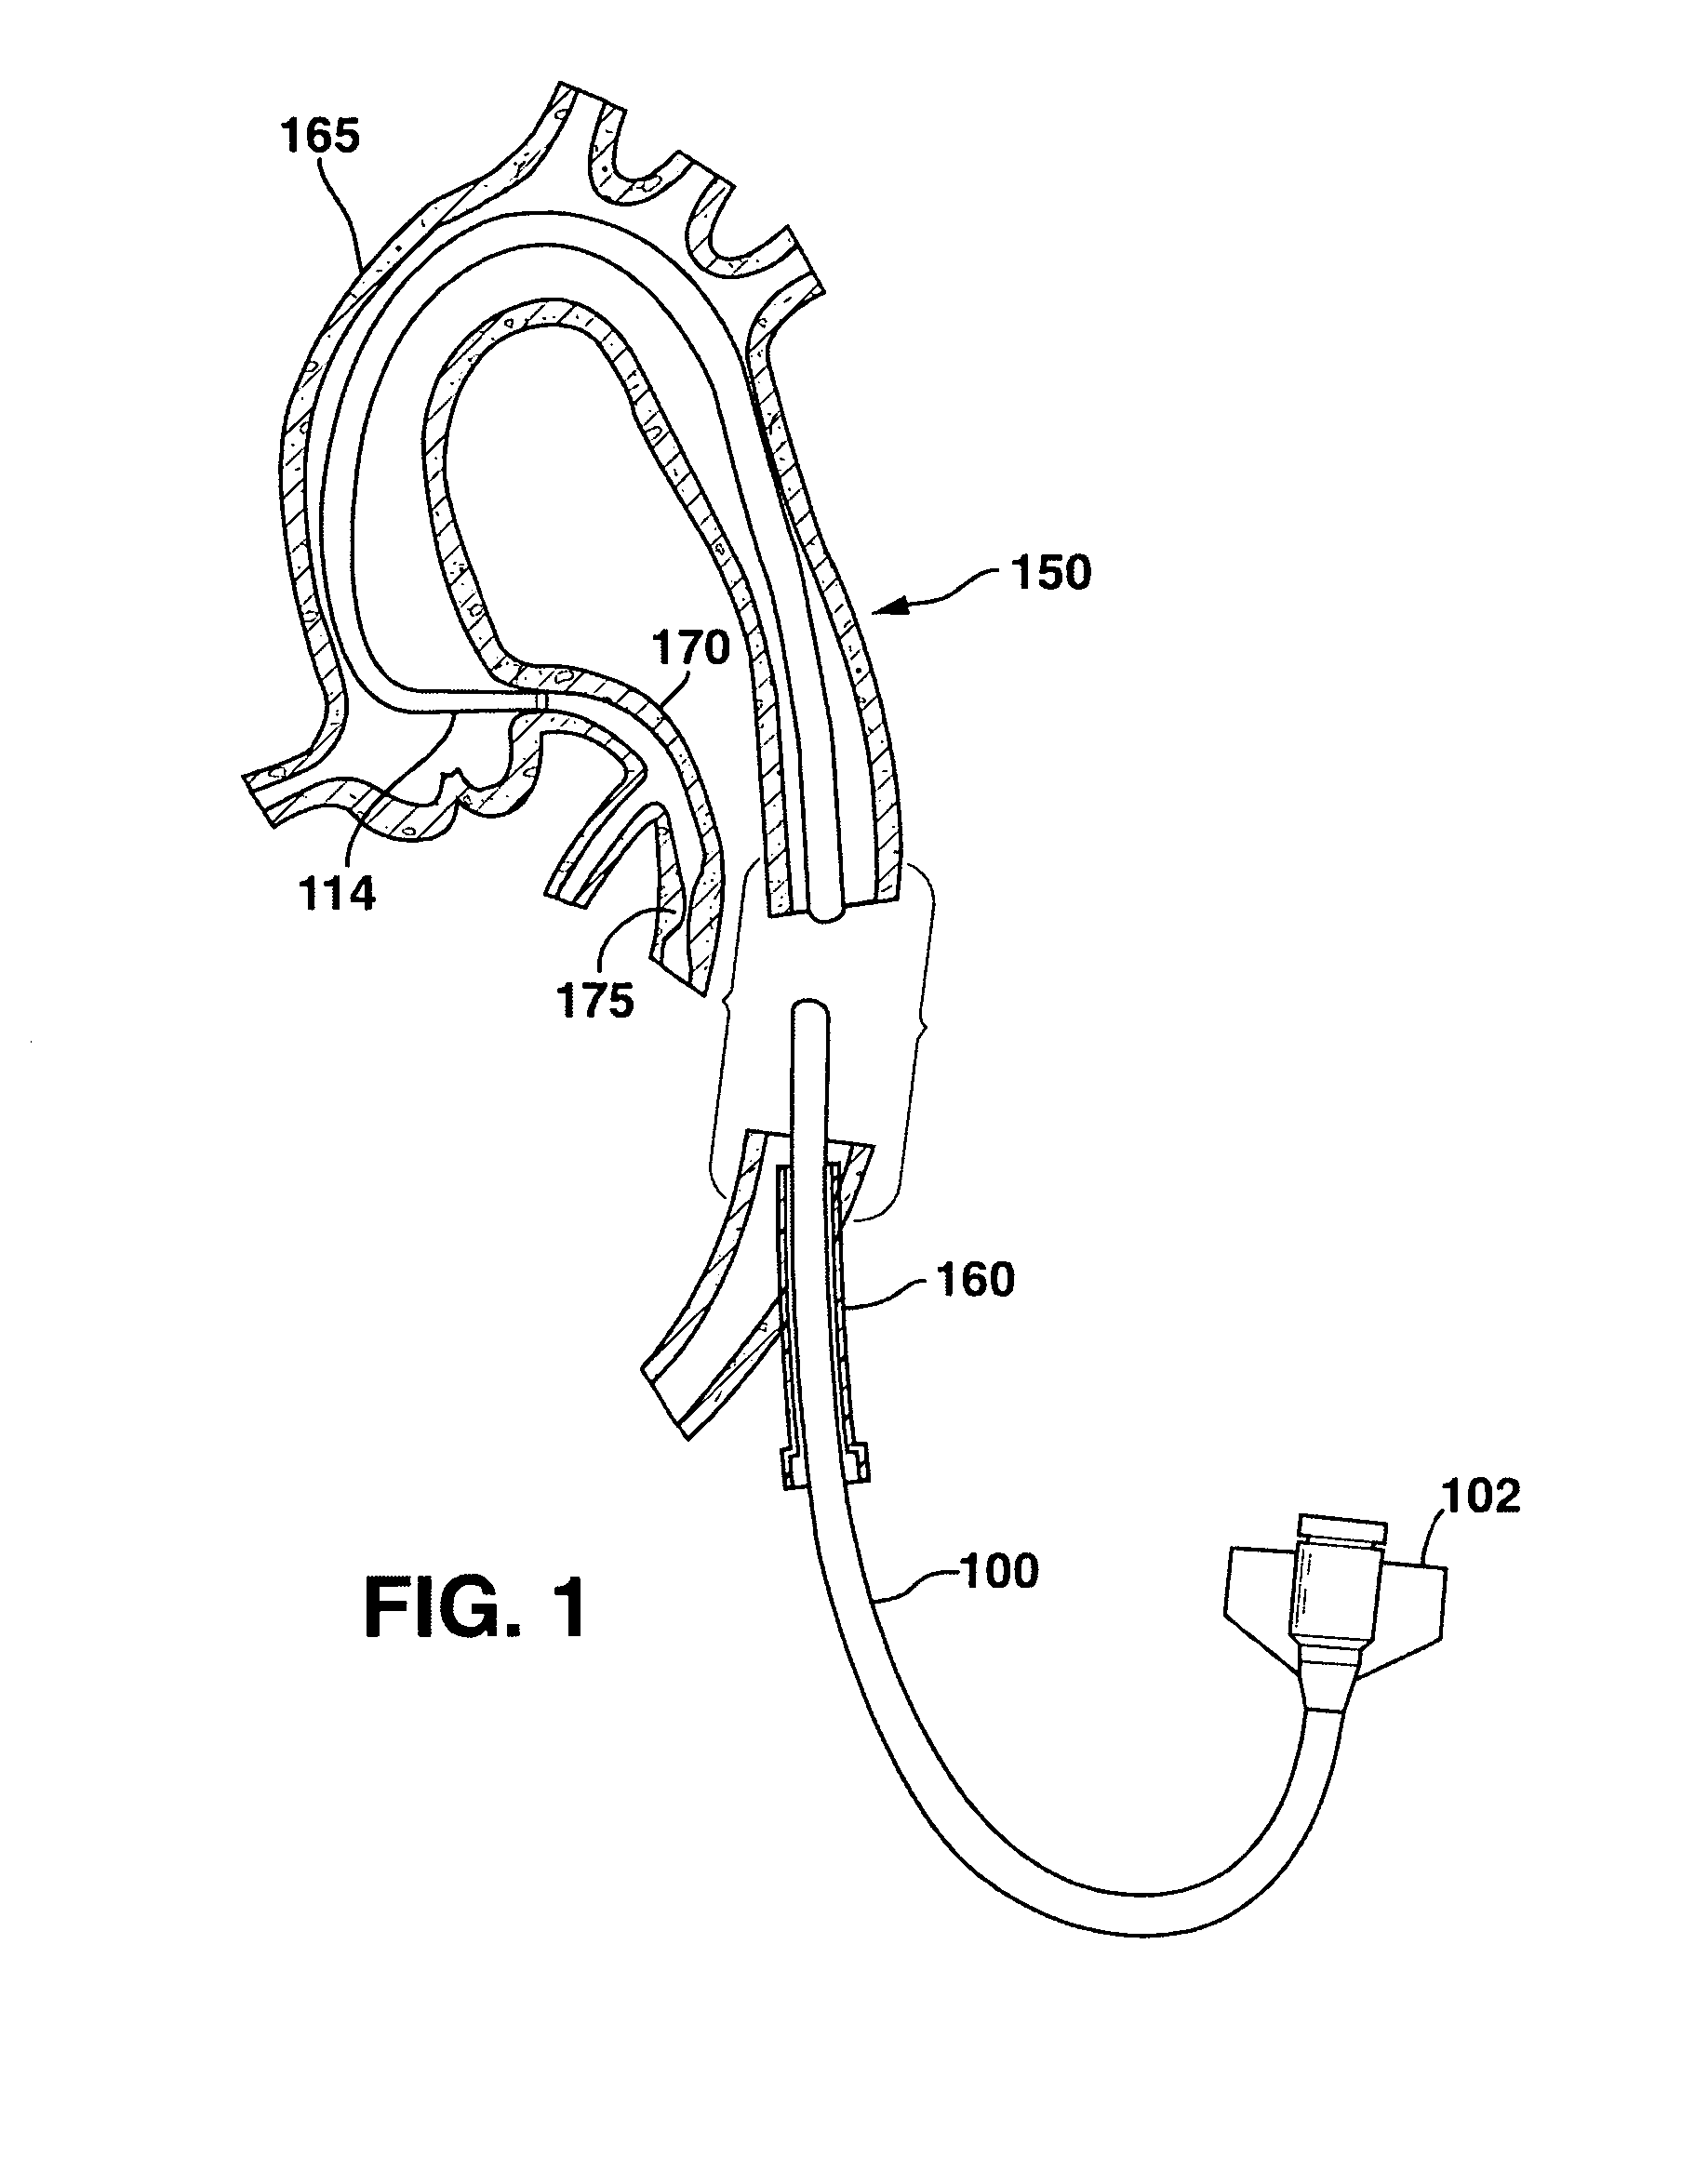 Composite laminated catheter with flexible segment and method of making same